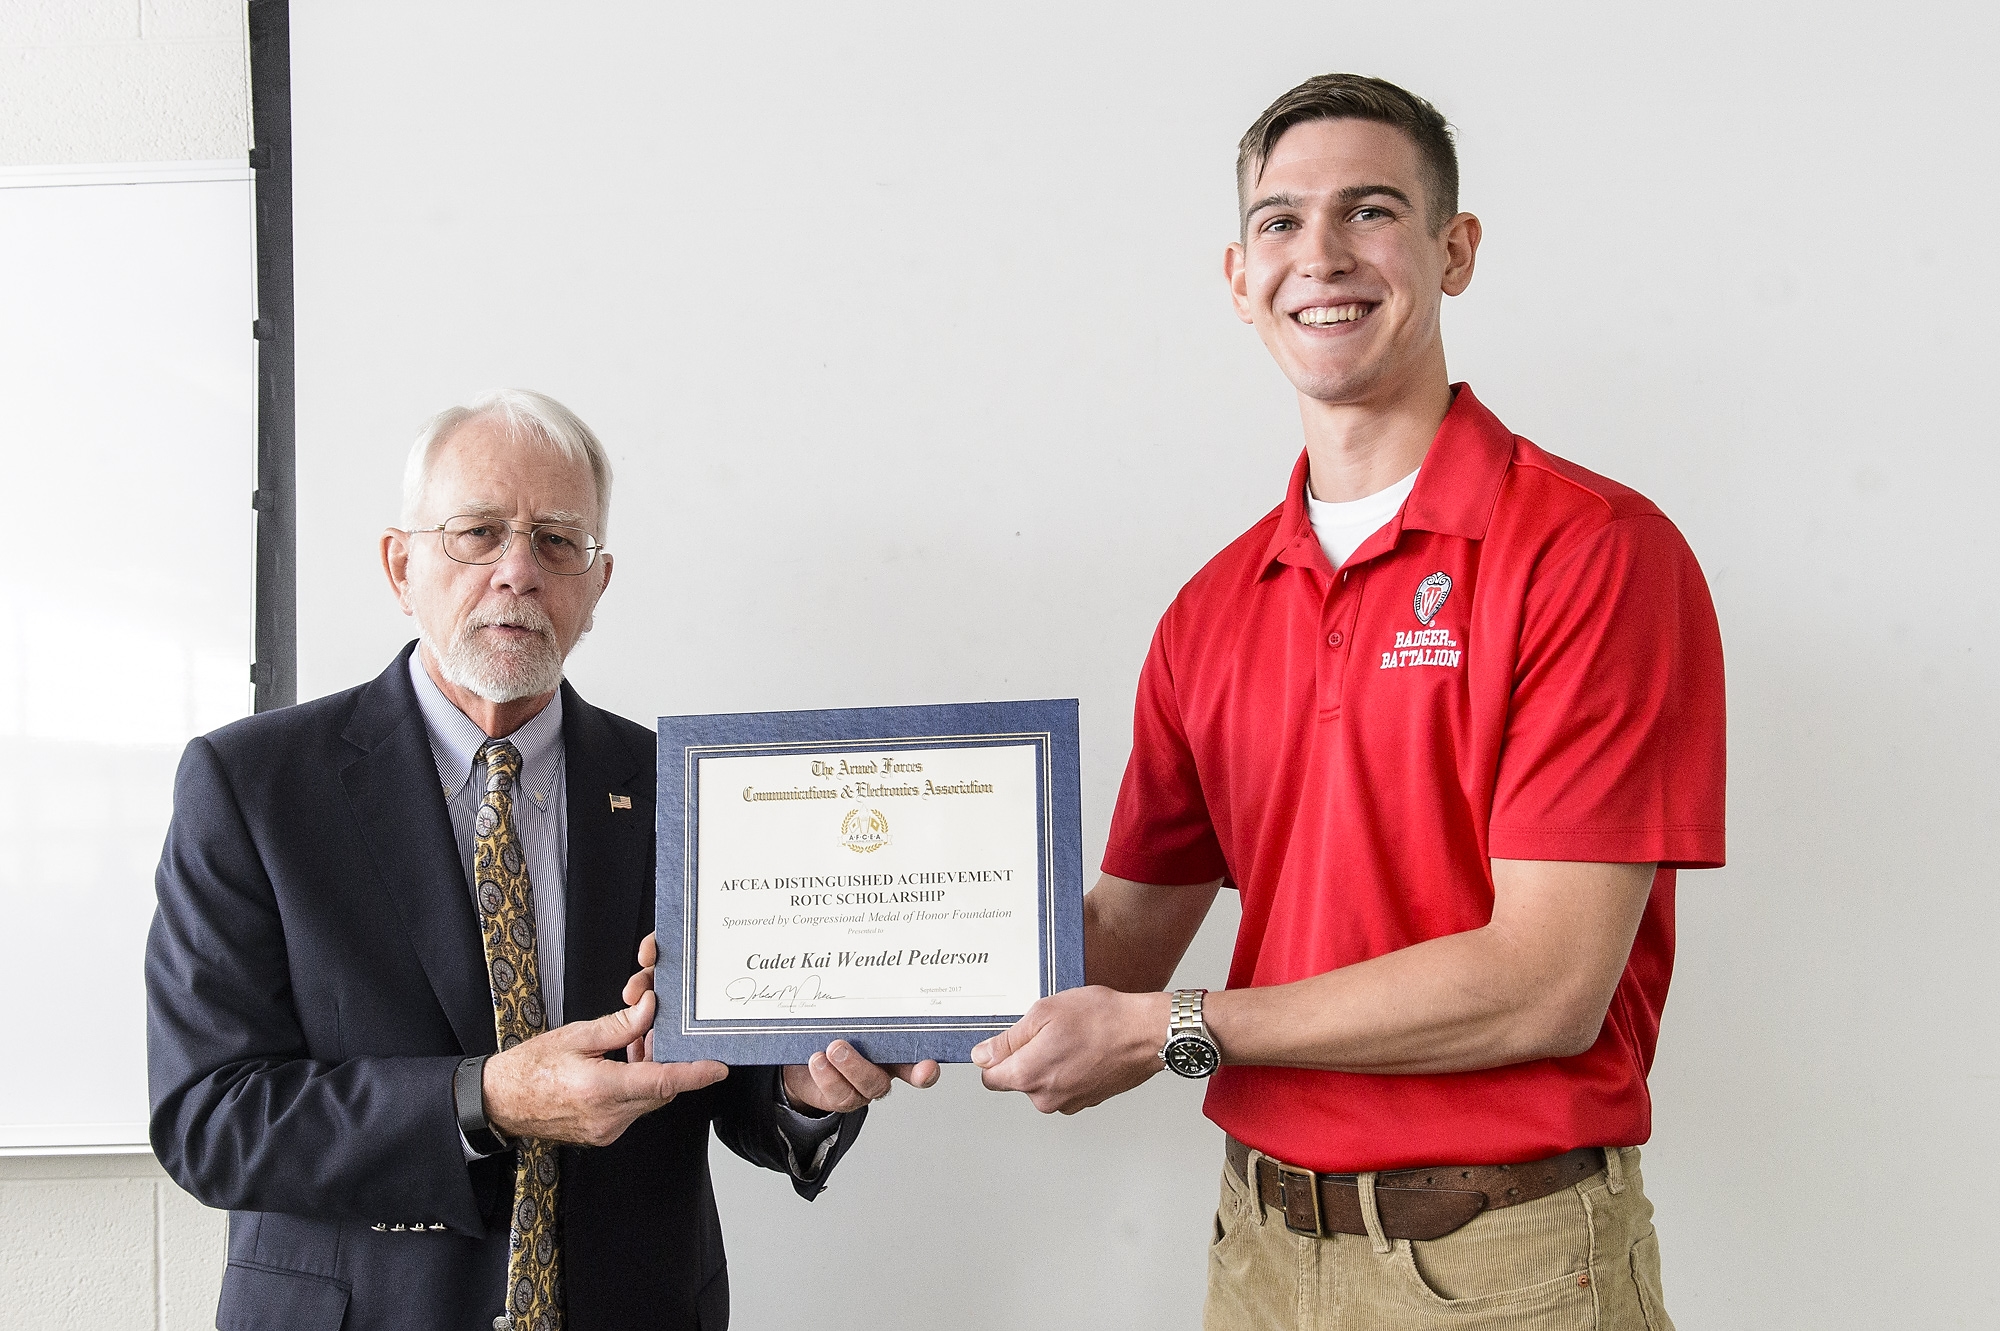 Army ROTC cadet Kai Pederson (right), a UW-Madison junior, receives the Distinguished Achievement Scholarship from Ronald T. Rand (left), a retired U.S. Air Force brigadier general and president and CEO of the Congressional Medal of Honor Foundation, during a ceremony.